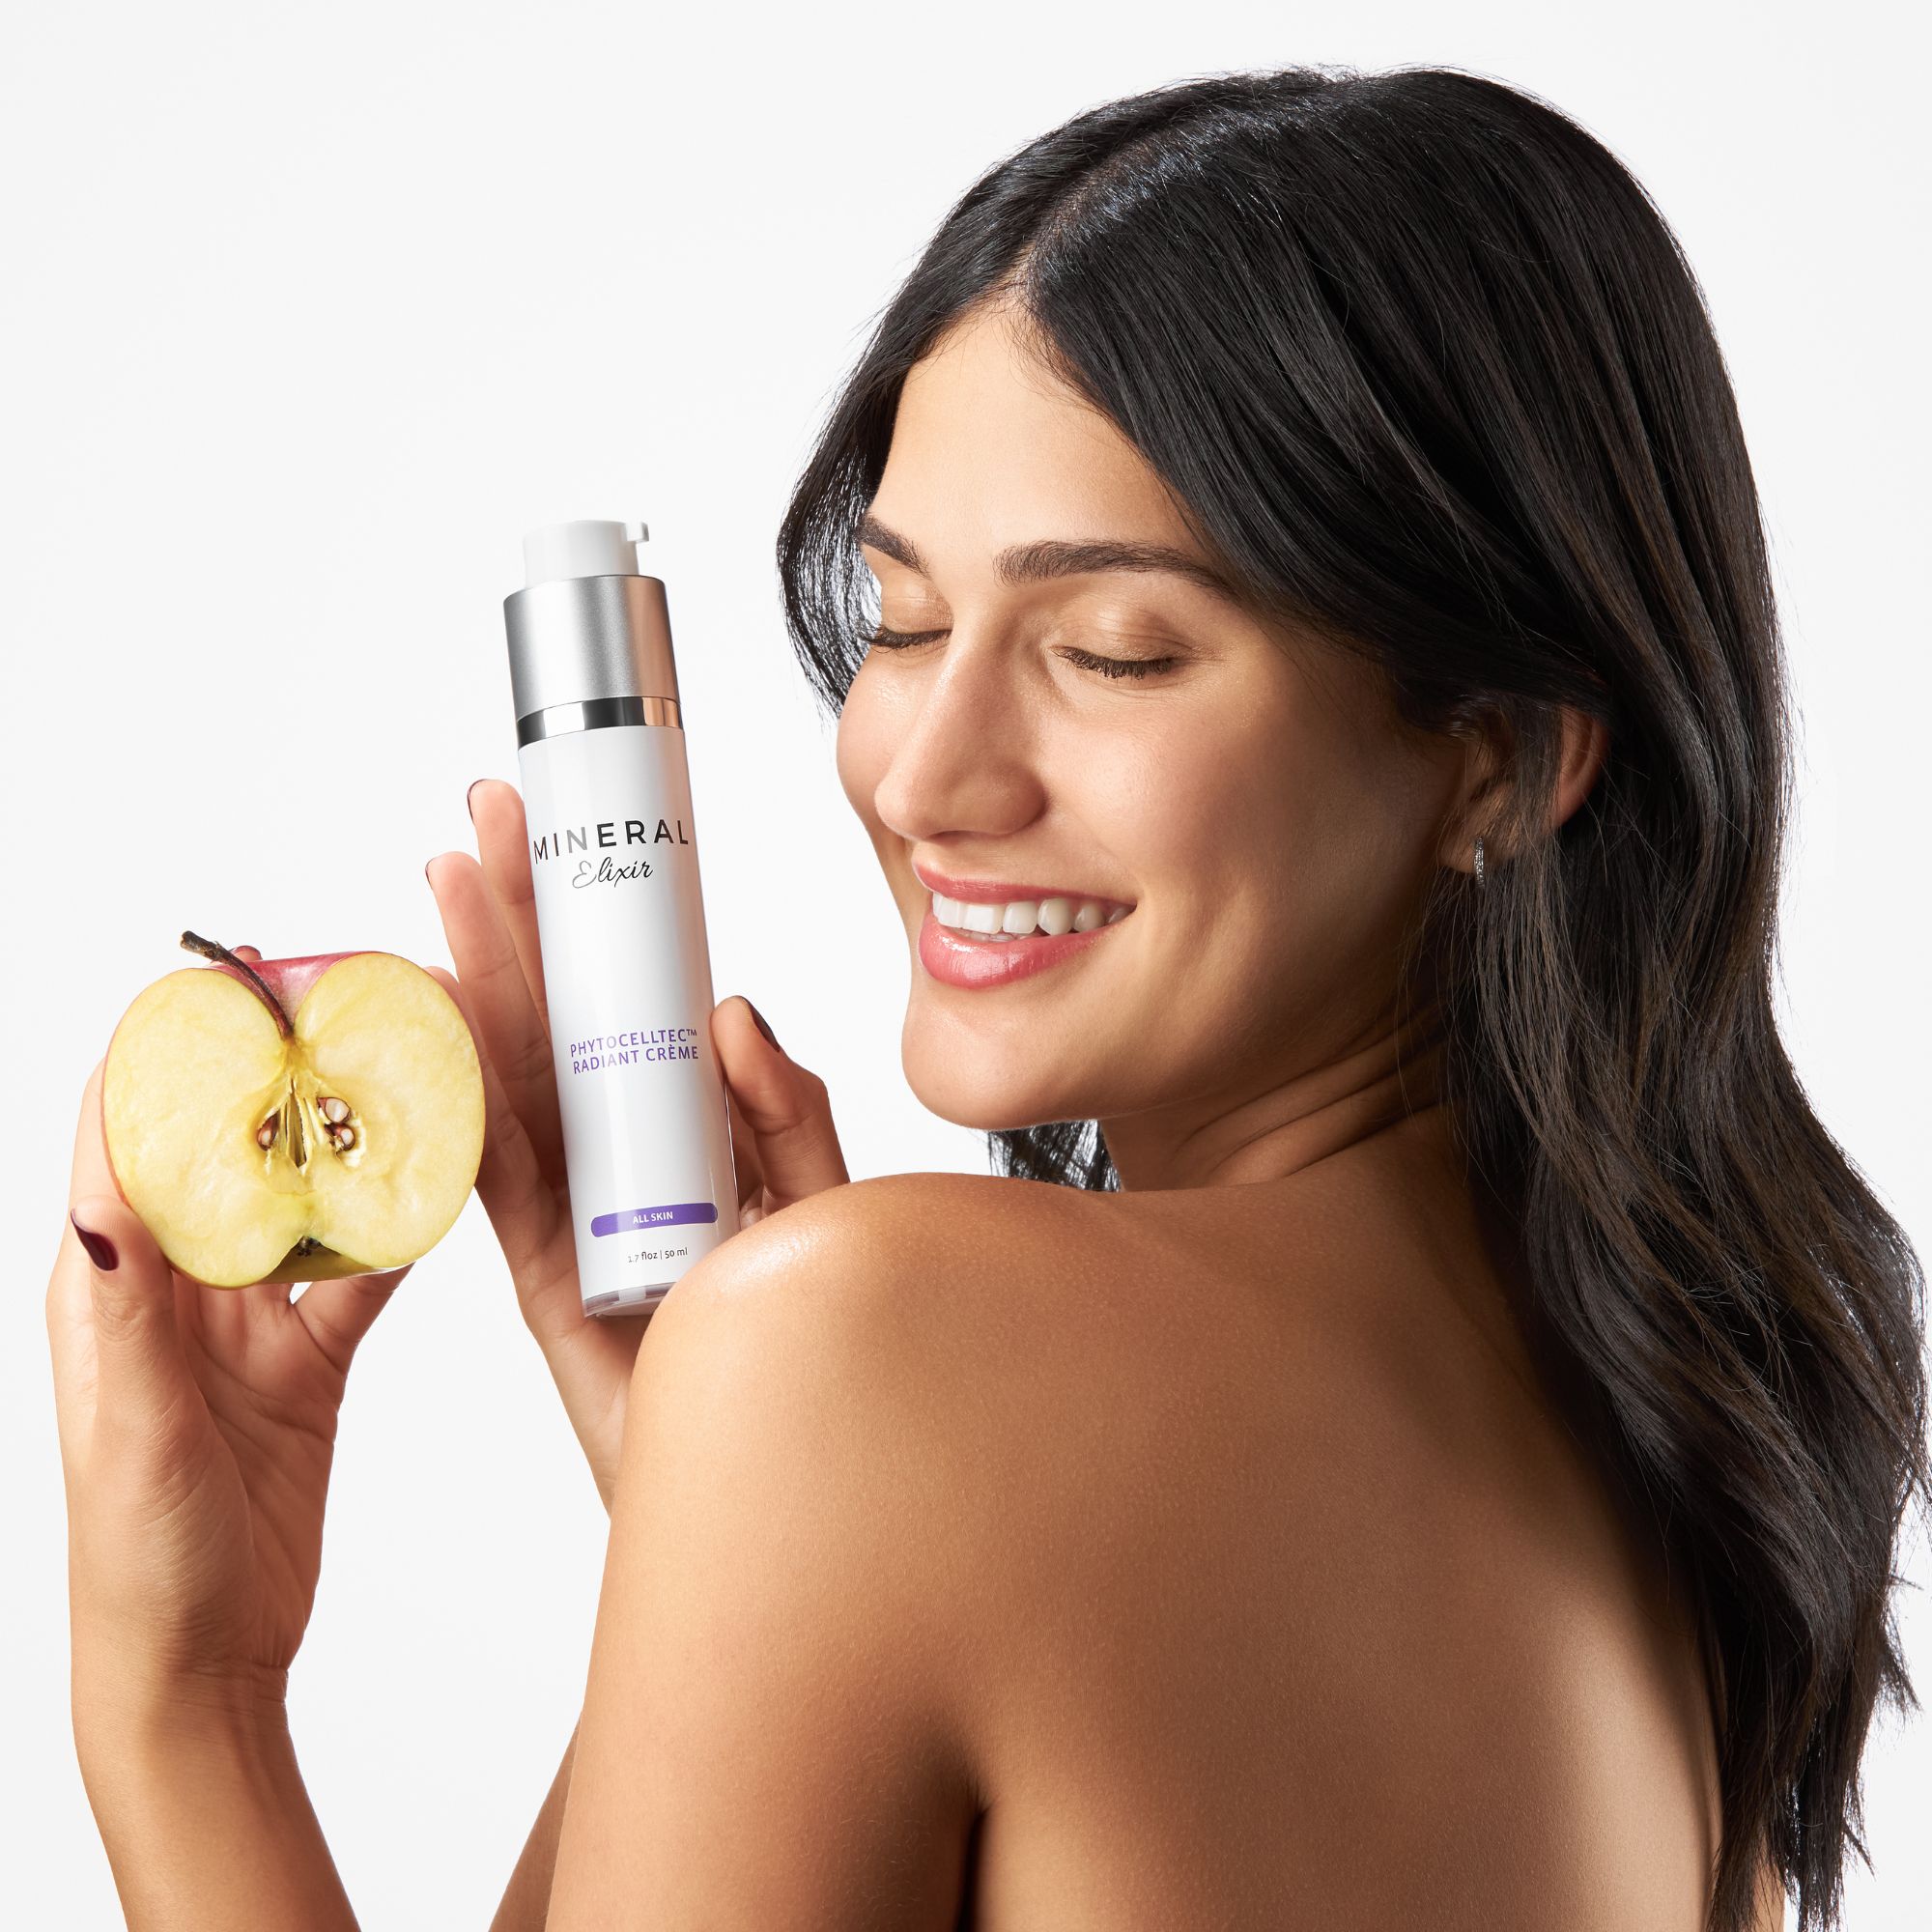 Smiling woman holding a fresh apple in one hand and a bottle of Mineral Enriched Radiant Cream in the other, showcasing natural skincare products on a white background